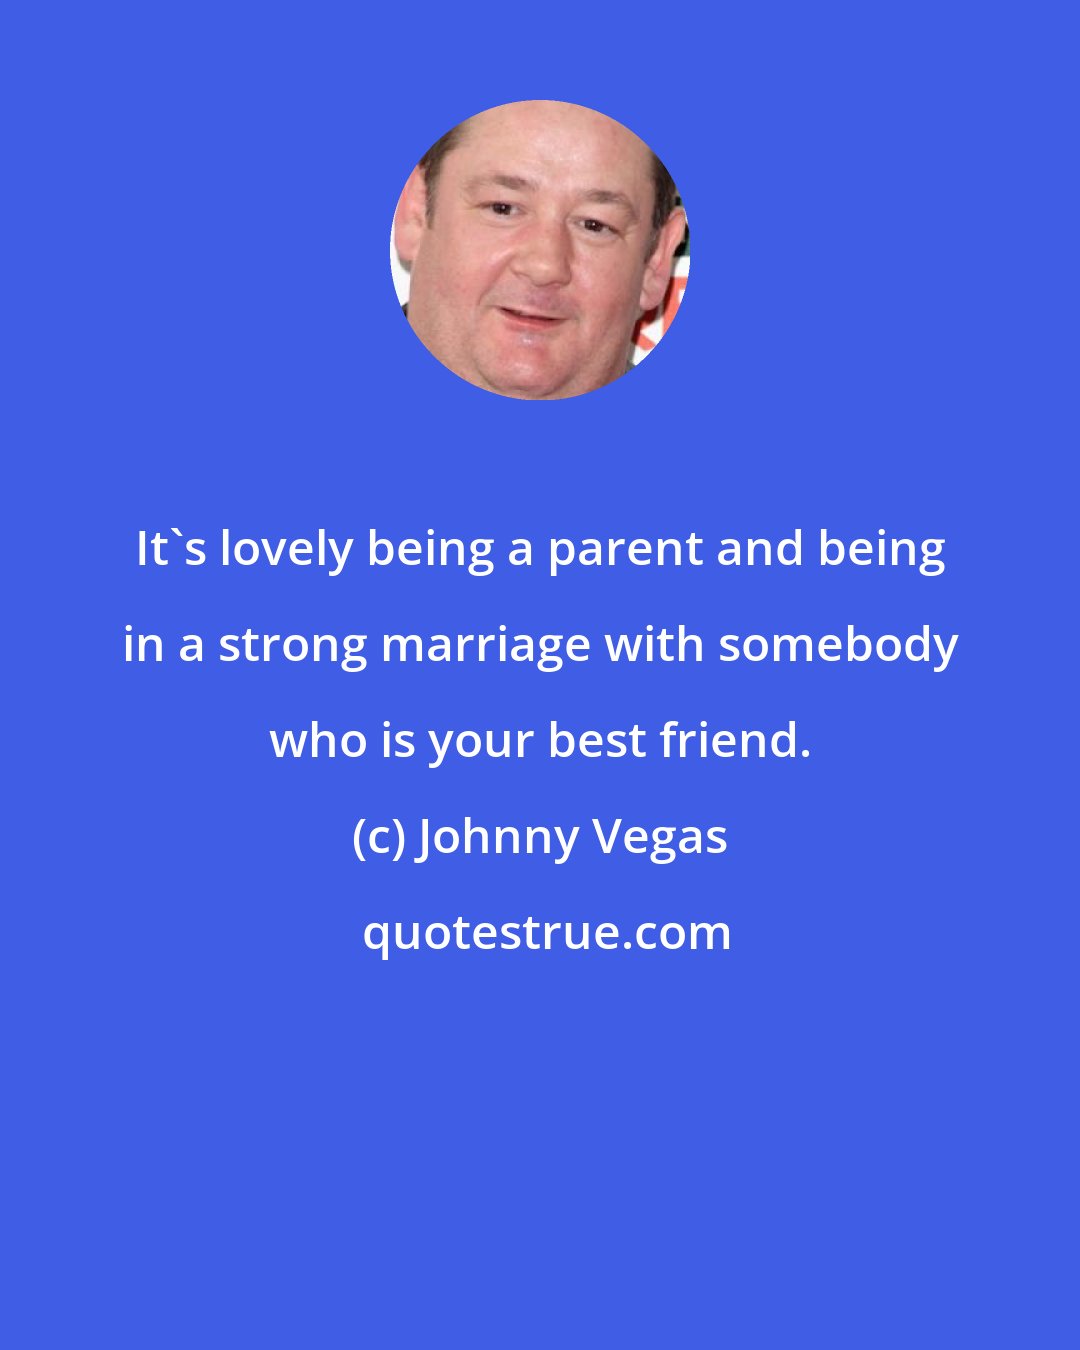 Johnny Vegas: It's lovely being a parent and being in a strong marriage with somebody who is your best friend.